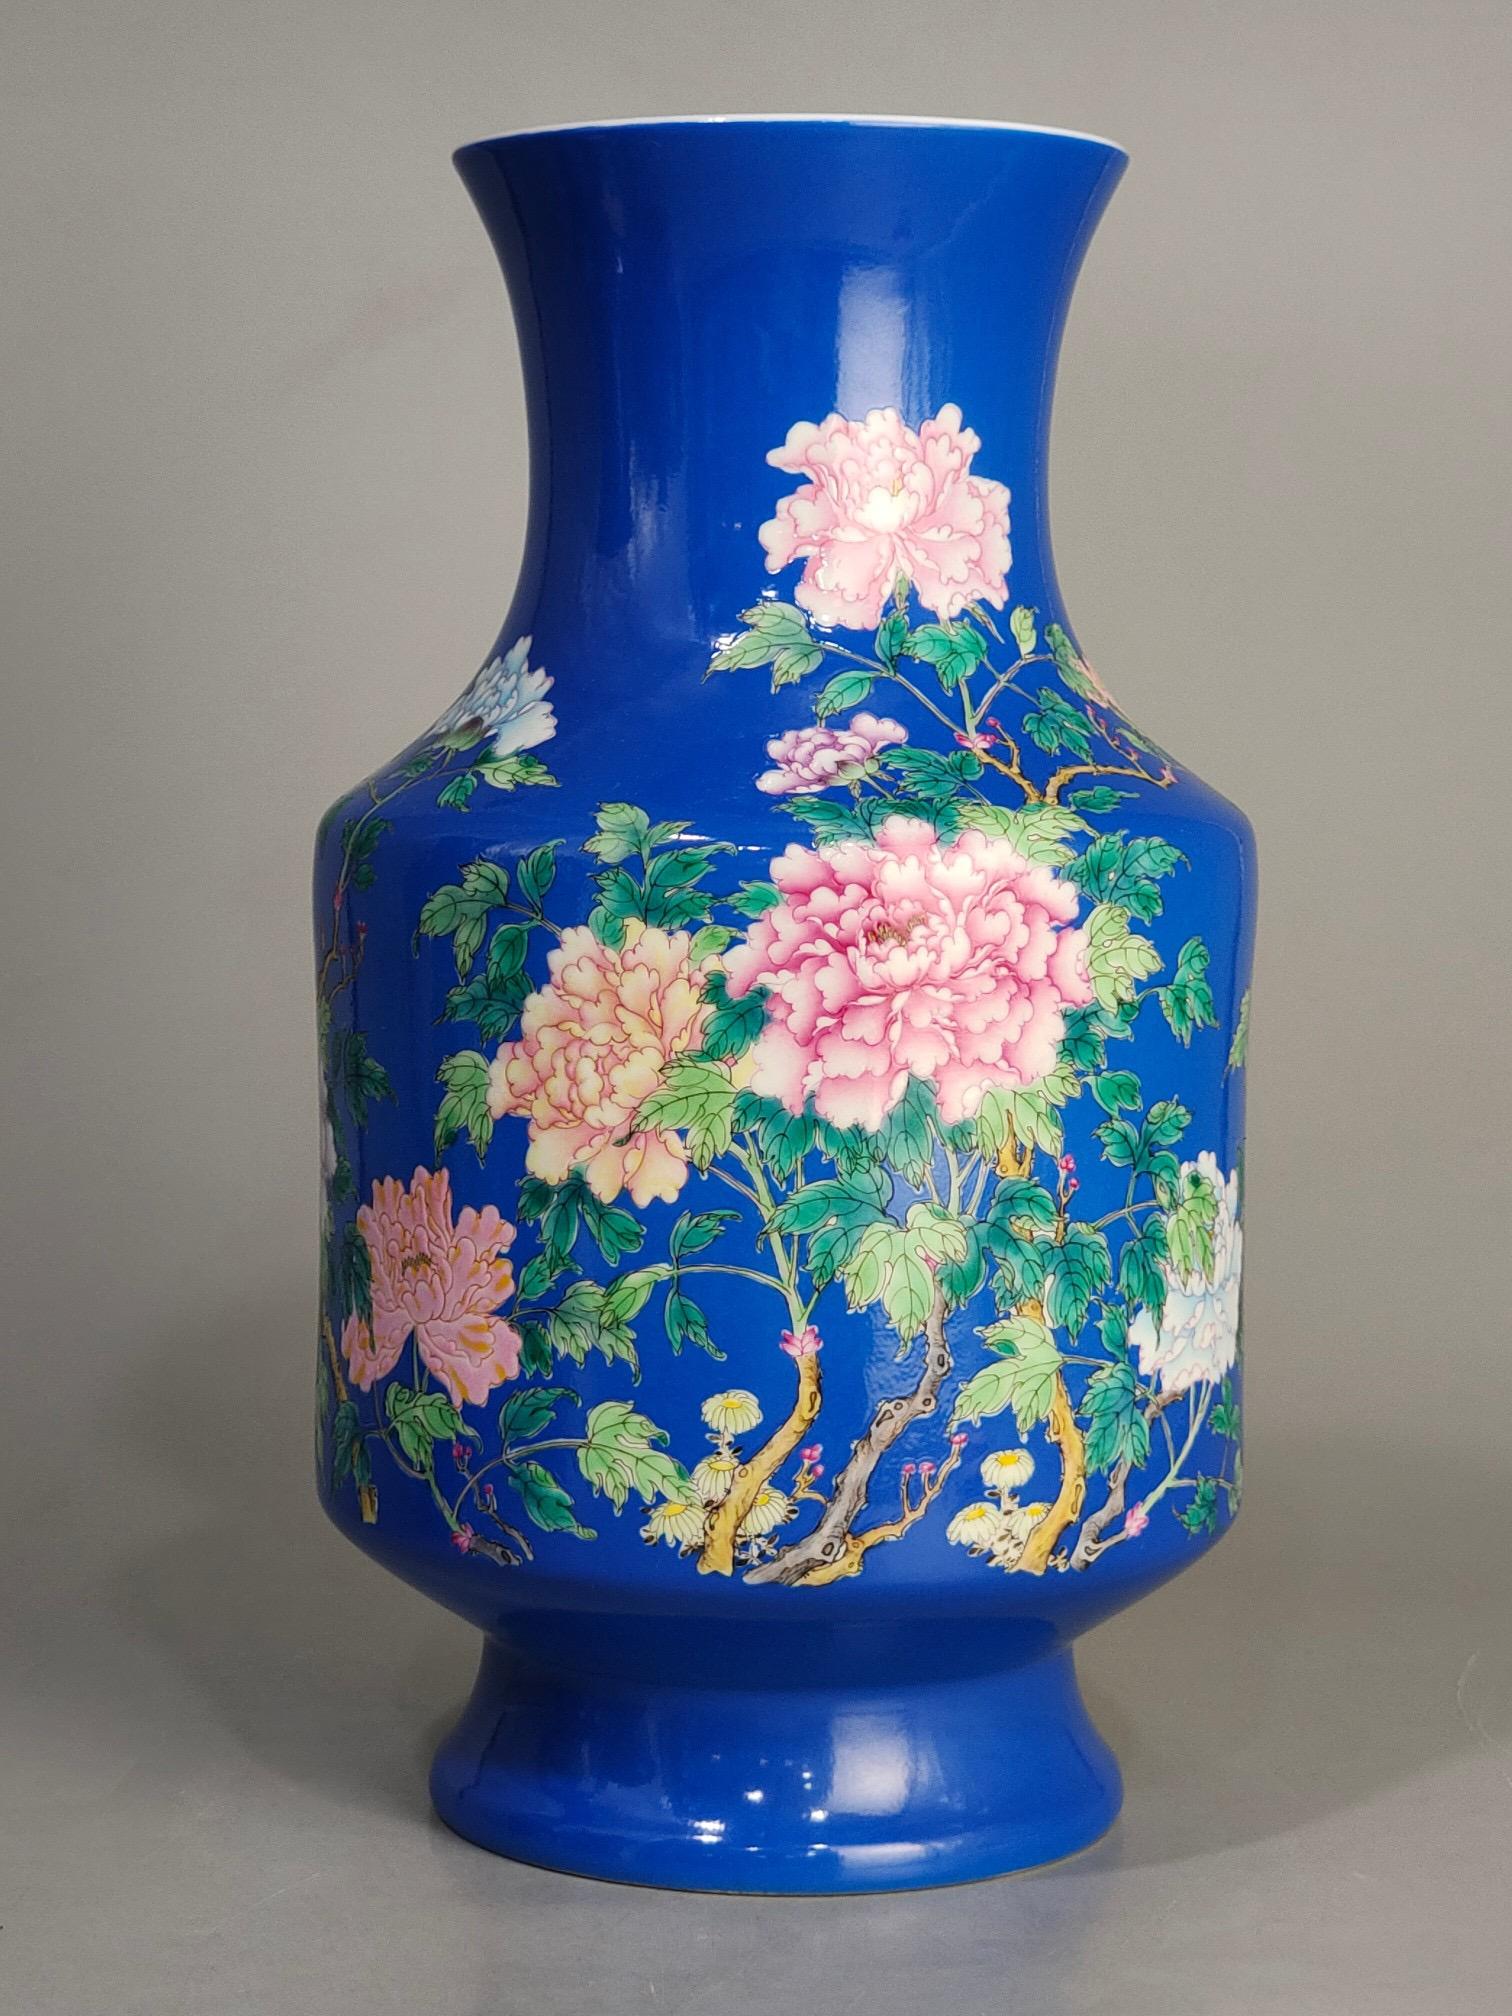 The Chinese Handmade Porcelain Enamel Flowers Auspicious Poem Vase is a beautiful and intricate piece of art. Chinese porcelain vases are highly regarded for their craftsmanship and artistic value.

The term 